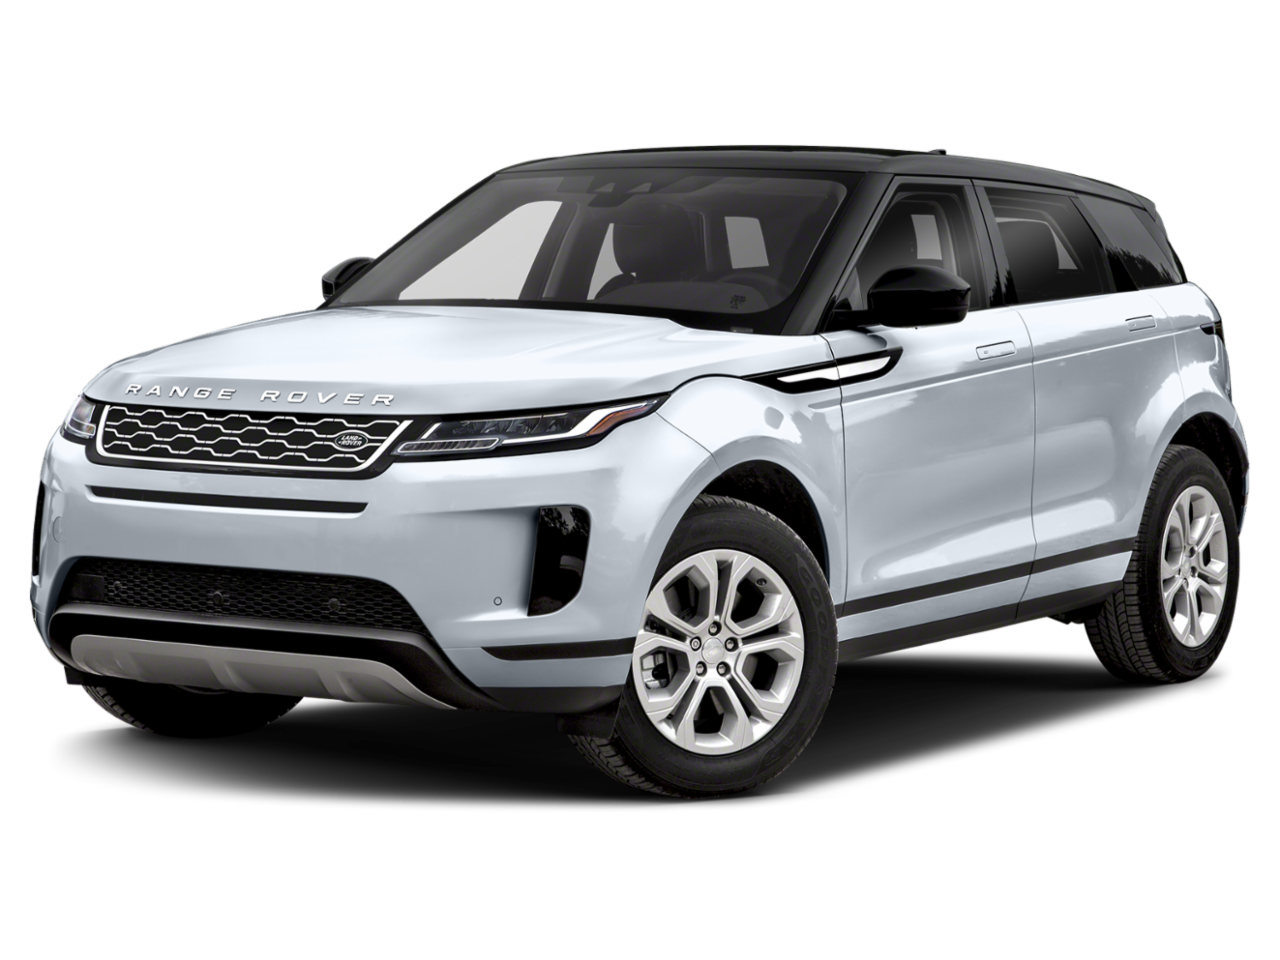 New Land Rover Range Rover Evoque from your City of Industry, CA 